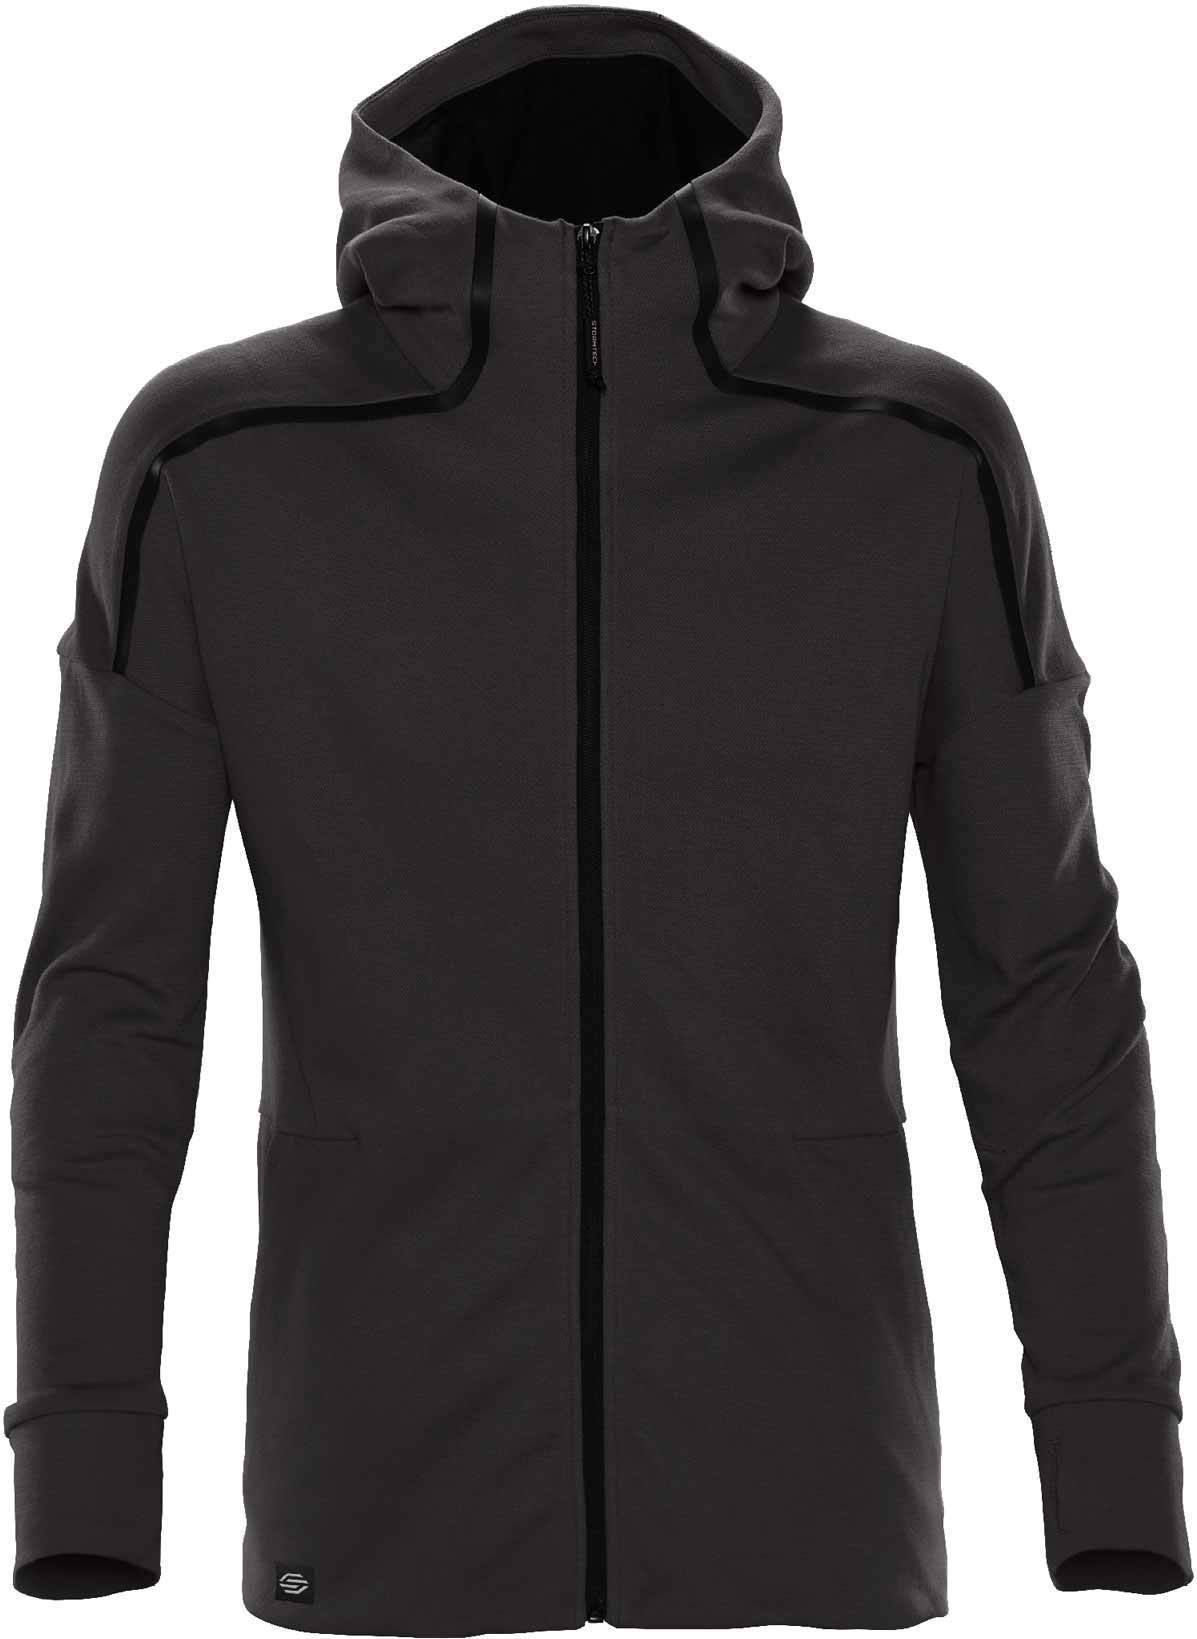 MH-1 Helix thermal hoody pour homme